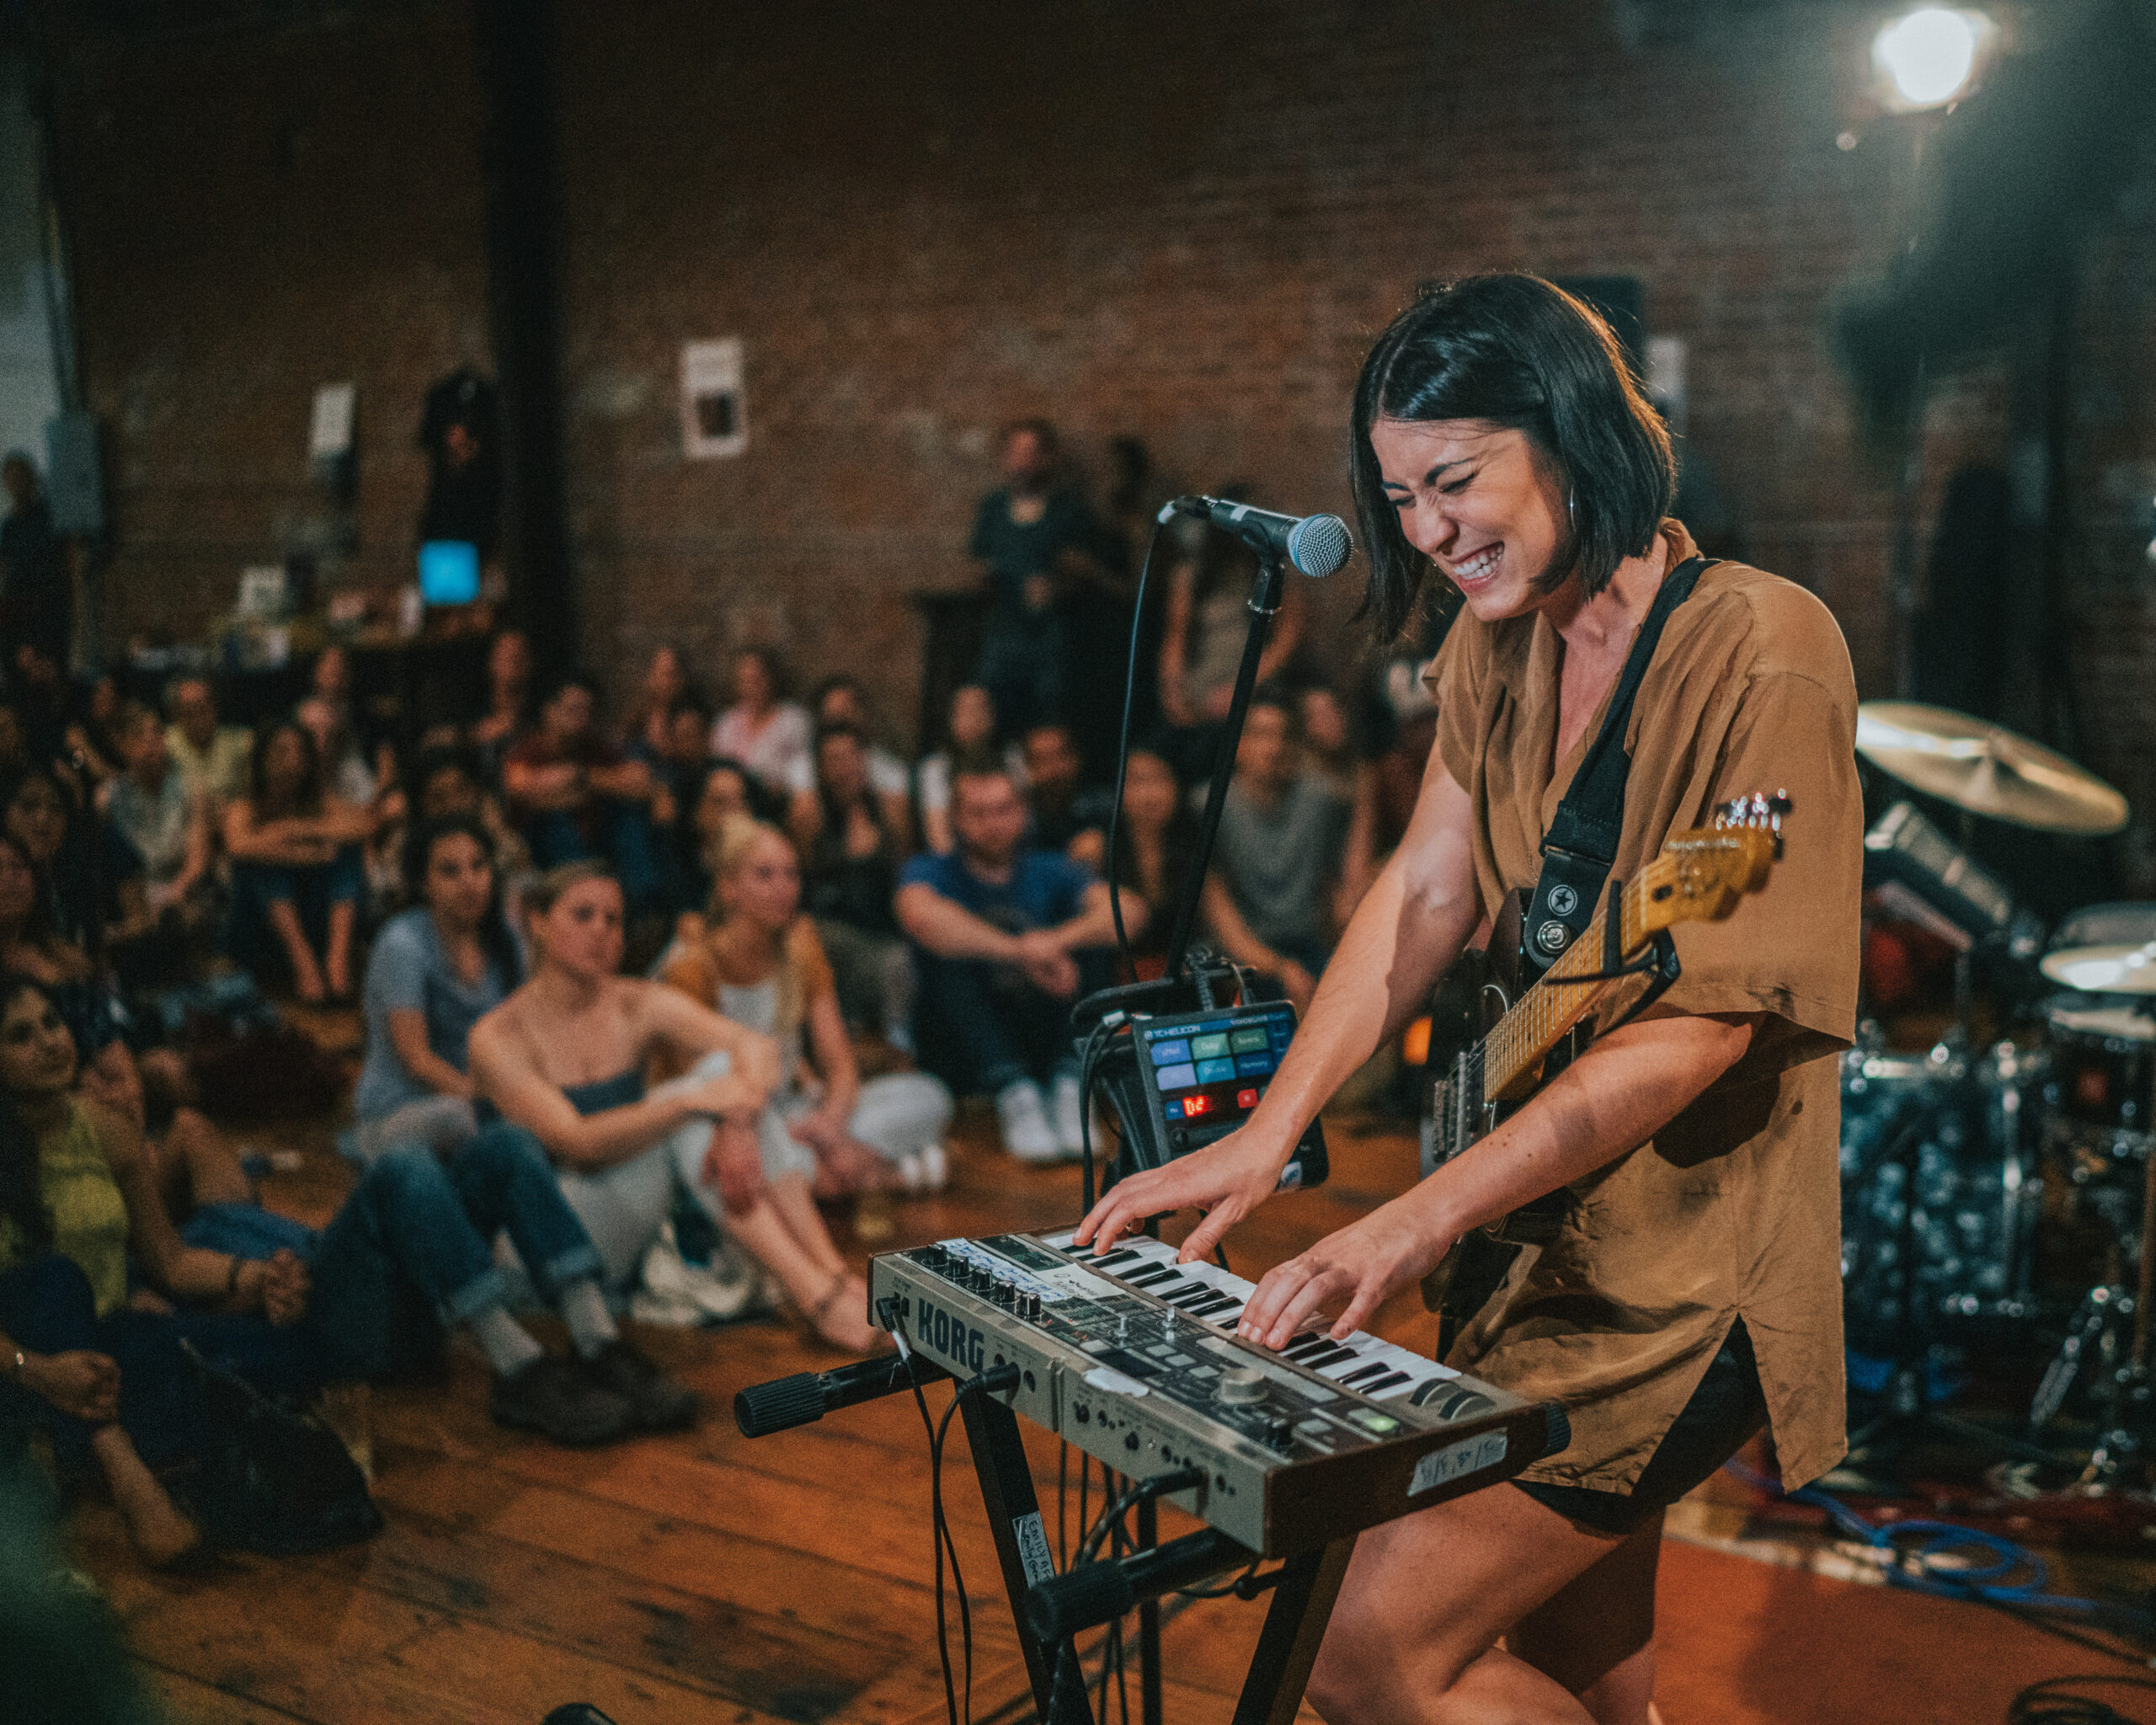 Visit the Sofar Sounds at Wynwood event page